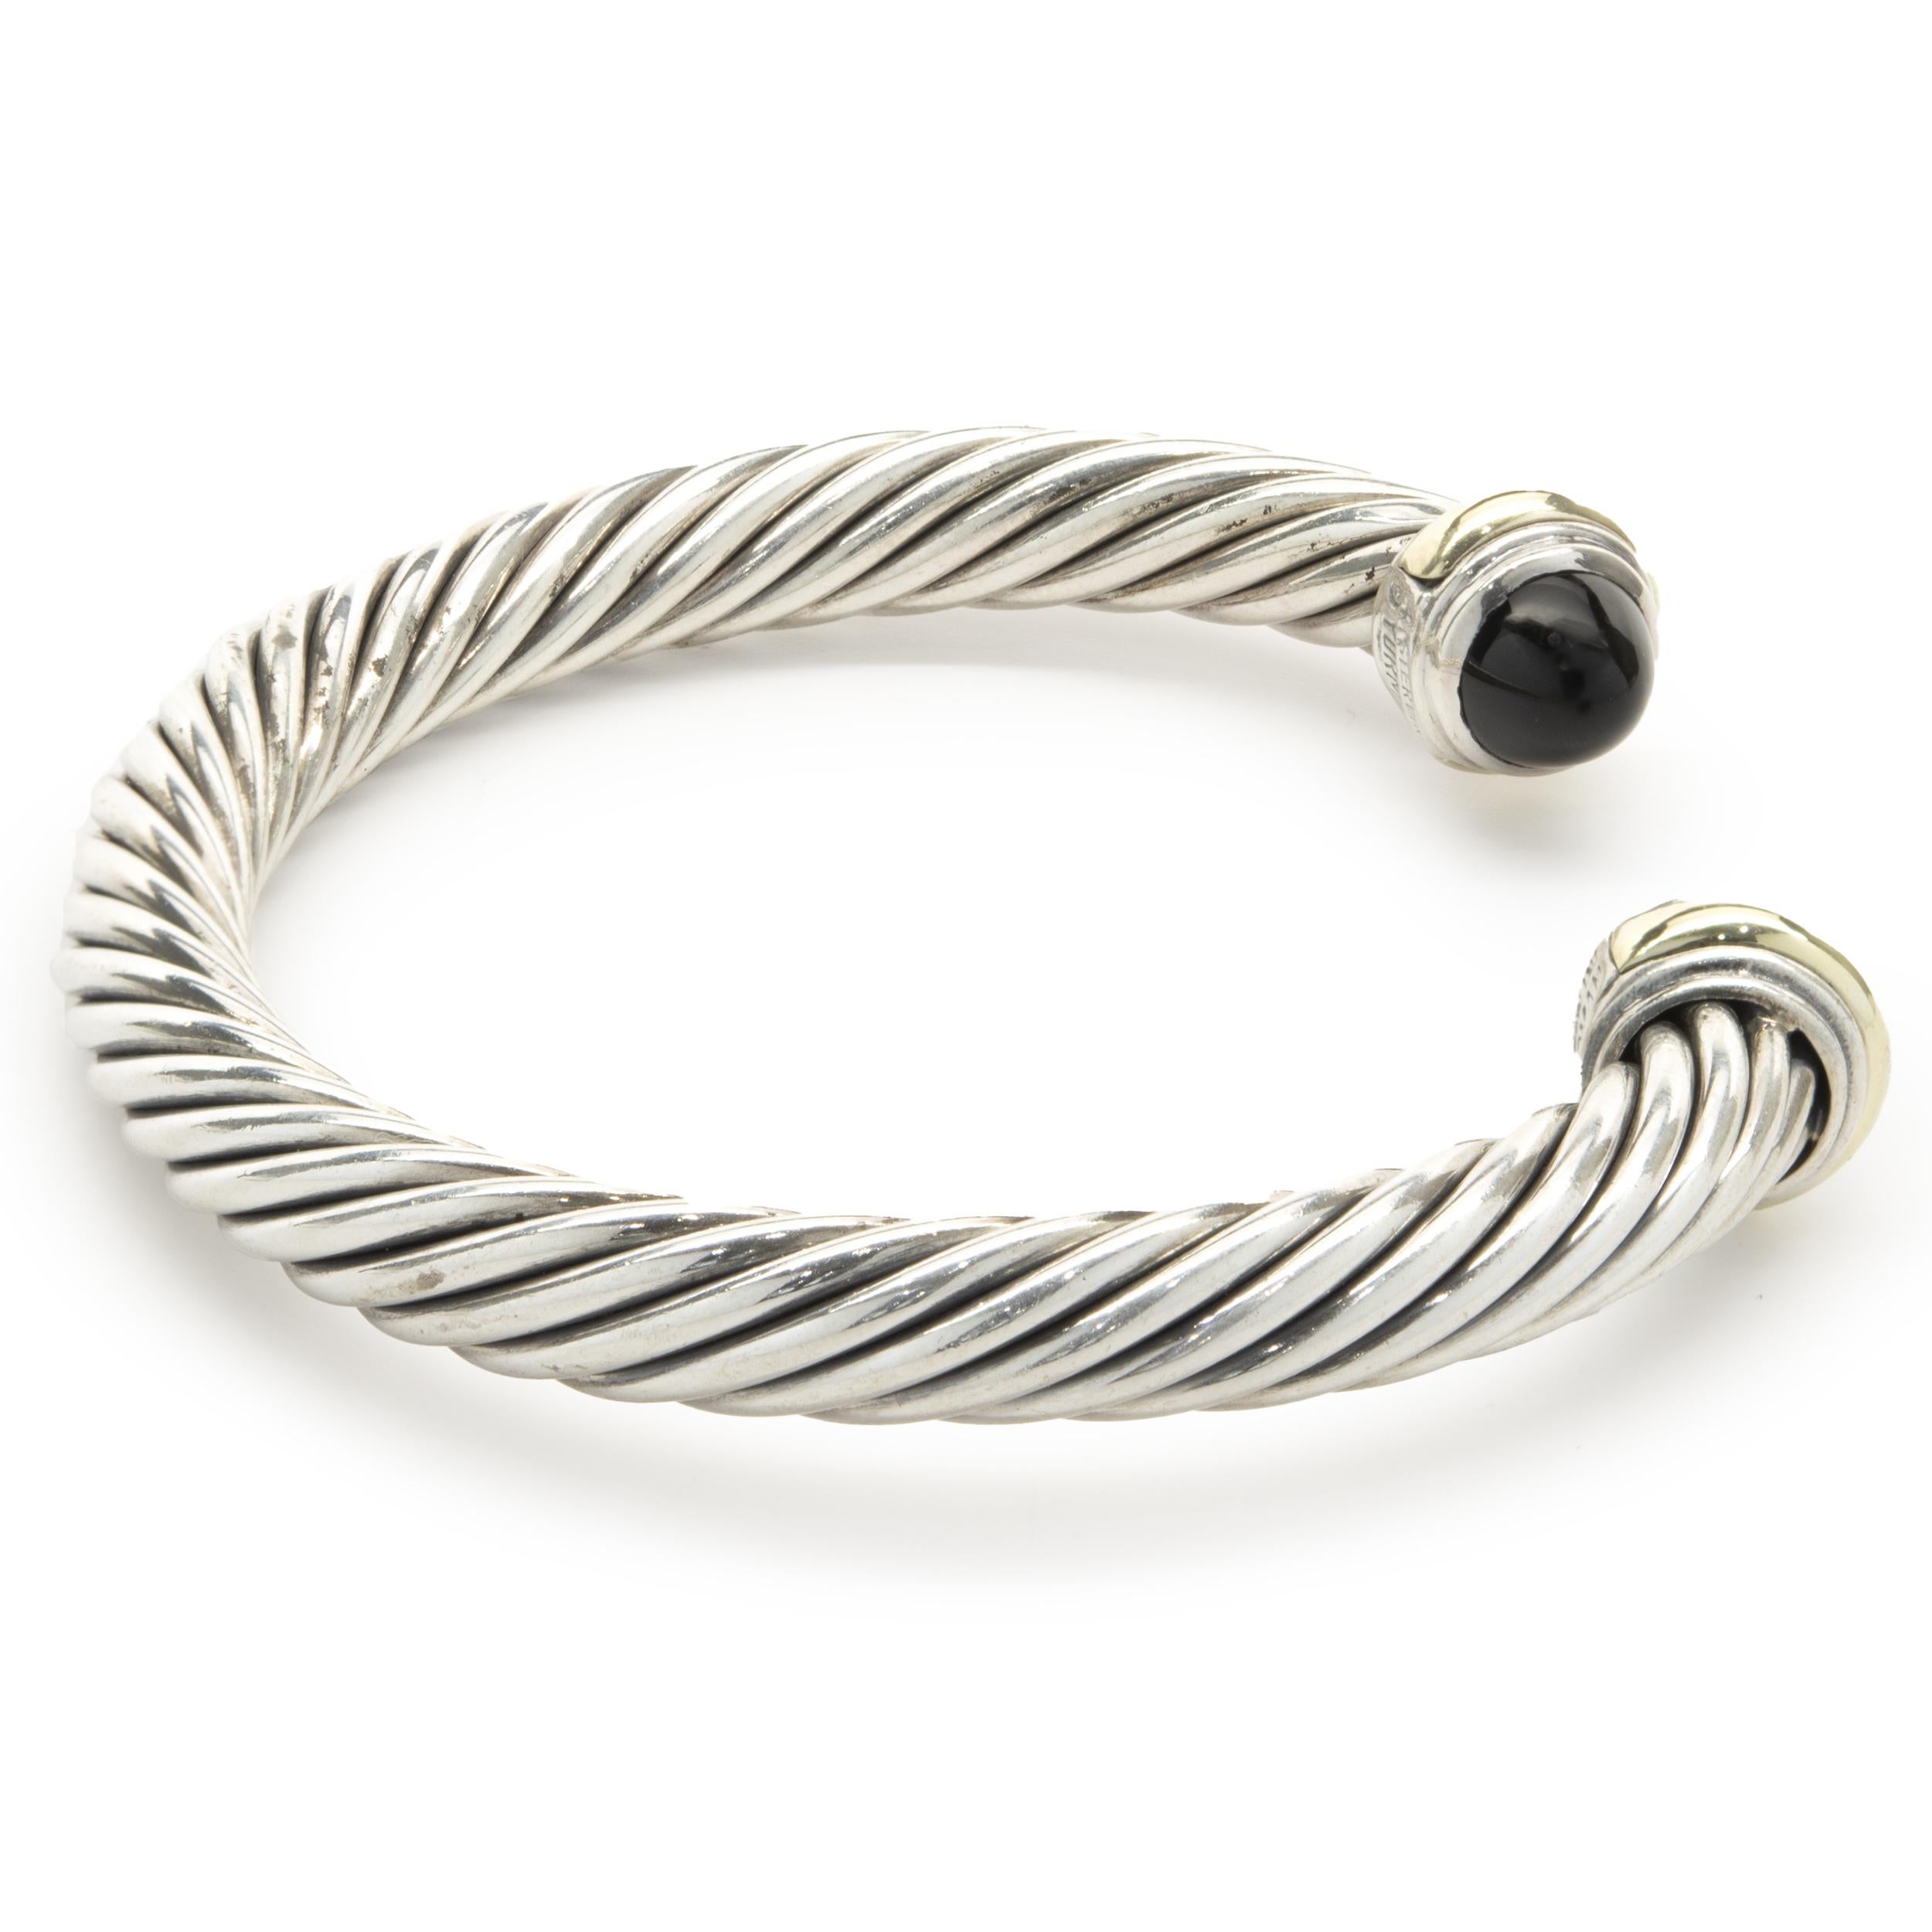 Designer: David Yurman
Material: sterling silver/14K yellow gold
Dimensions: bracelet will fit up to a 6.5-inch wrist
Weight: 43.85 grams
